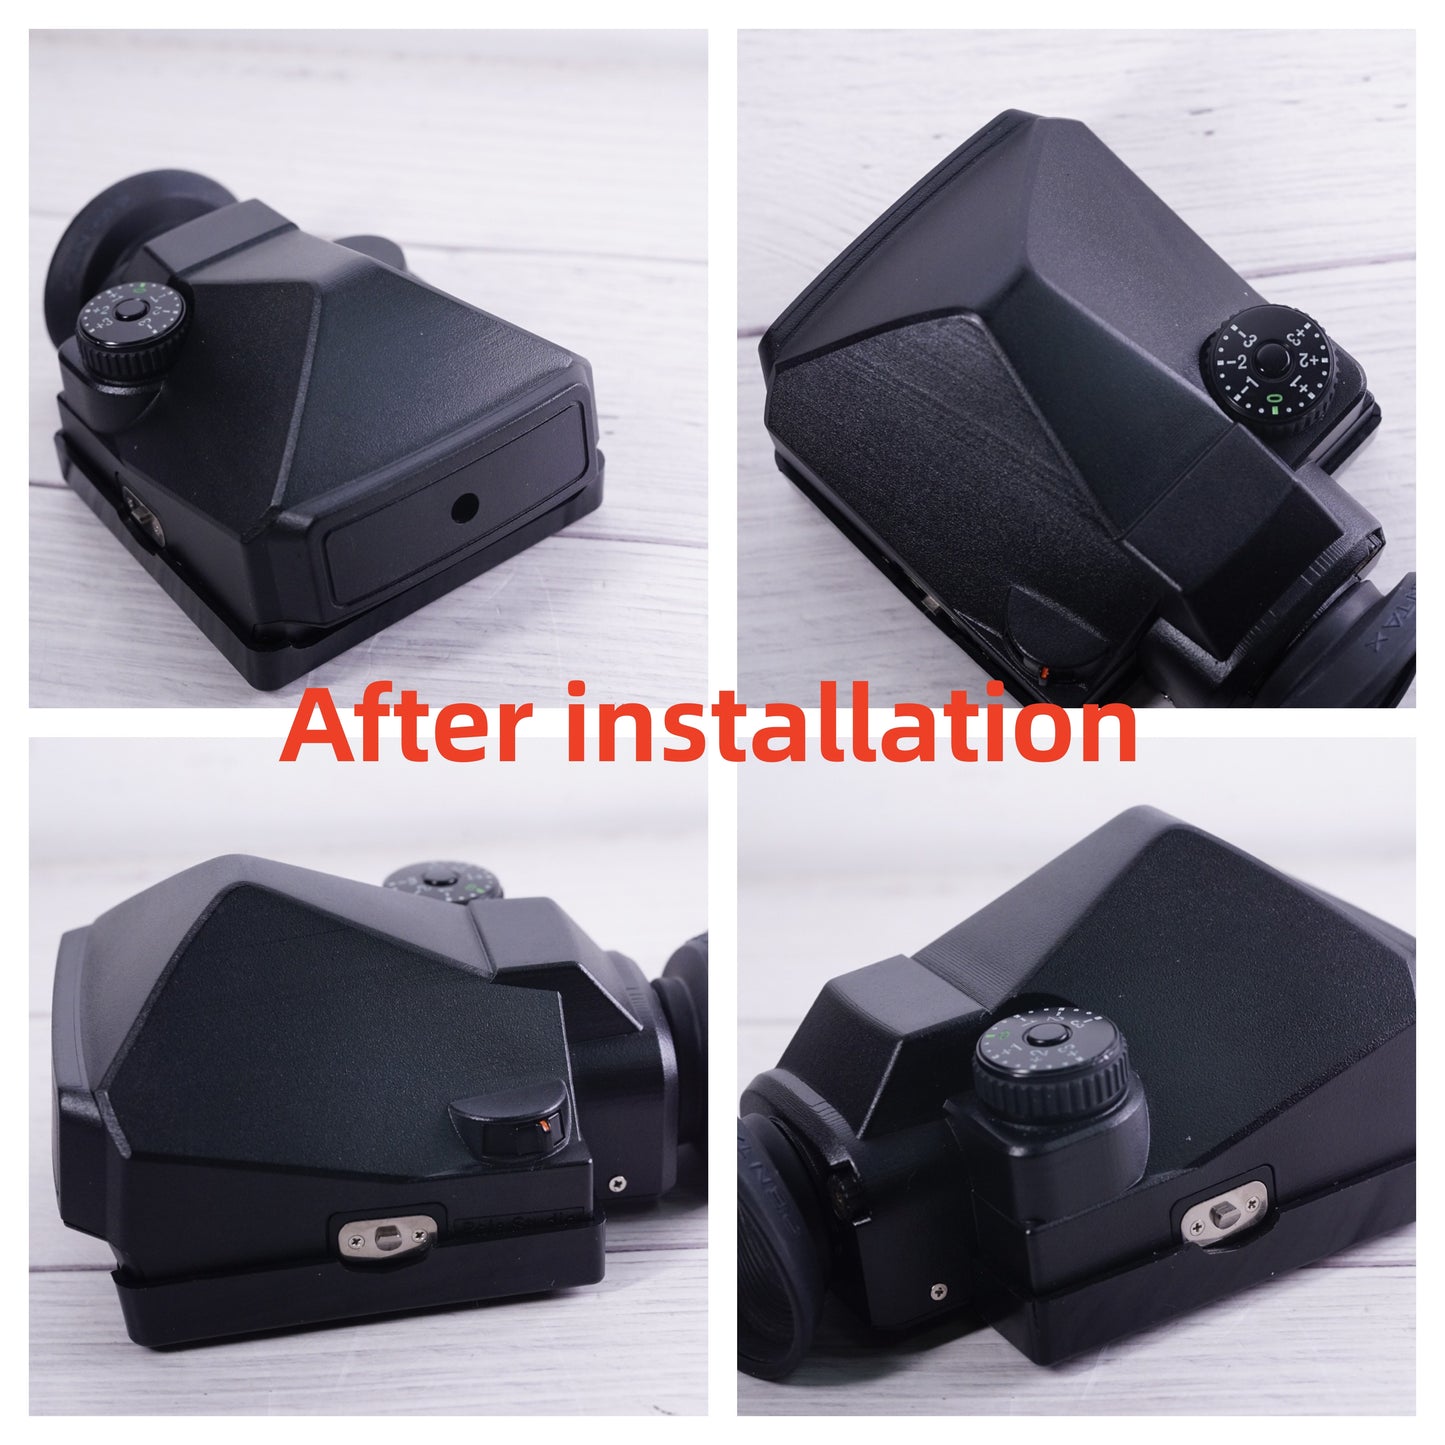 PENTAX 67II VIEWFINDER SHELL/HOUSING Replace Parts ACCESSTORY